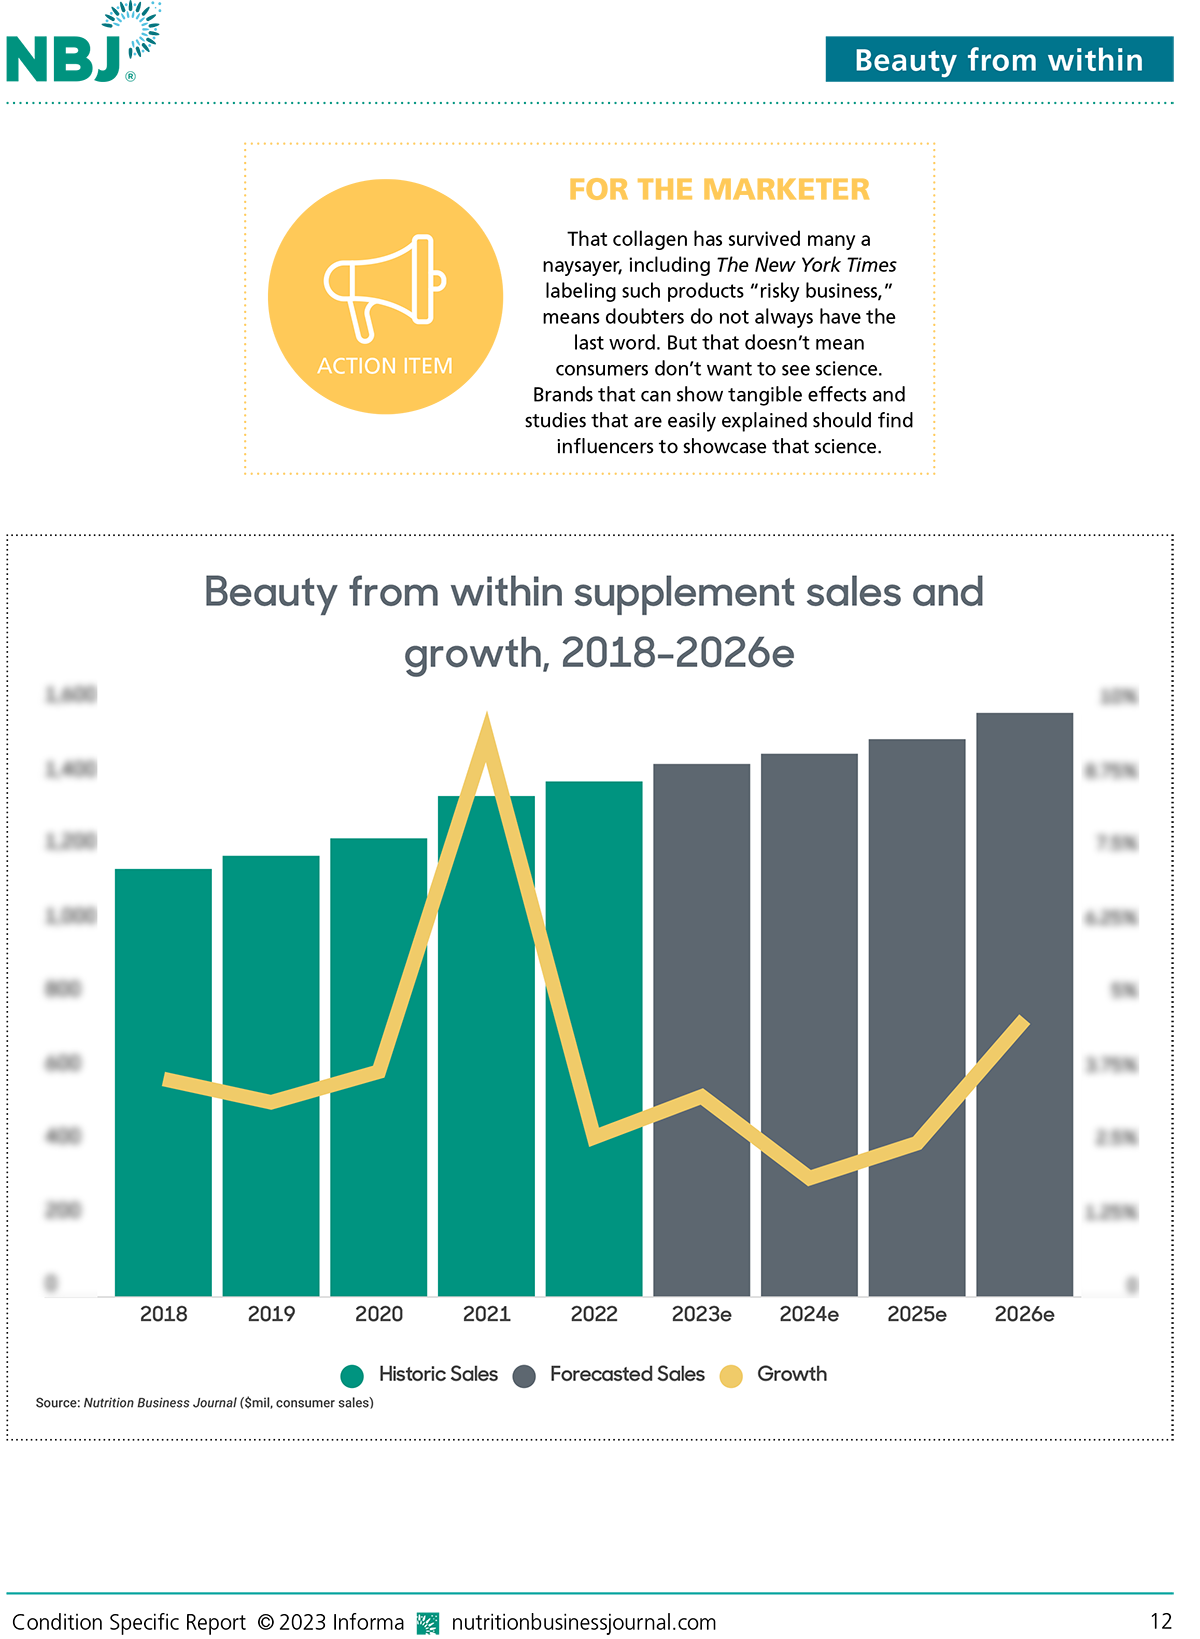 Beauty from within sales and growth